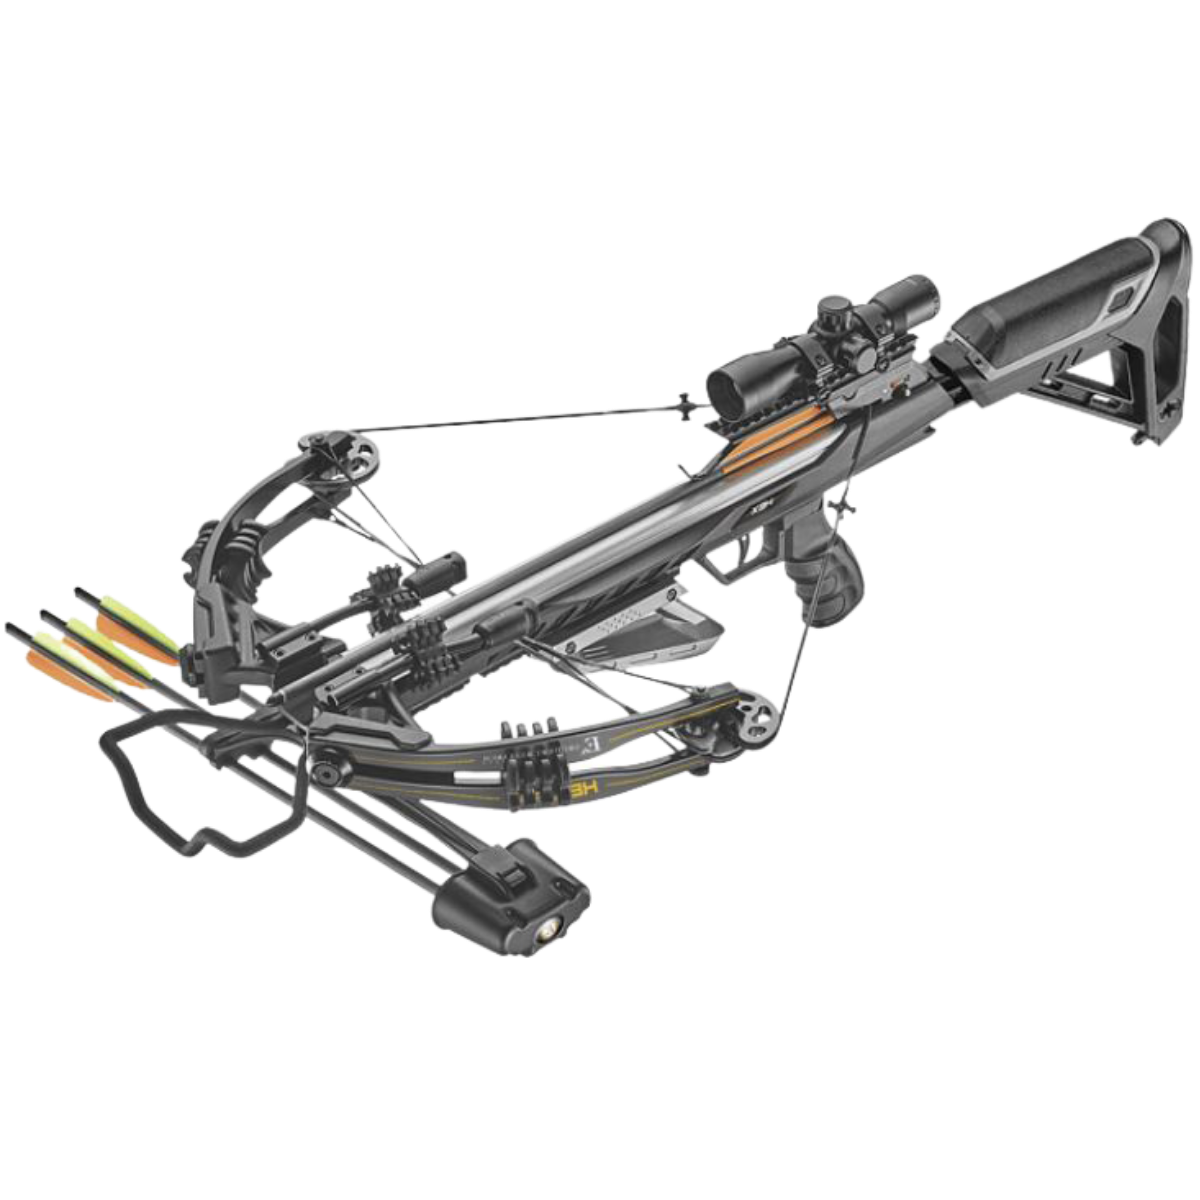 EK Archery HEX 400 Compound Crossbow Package 395fps - Fast UK Shipping | Tactical Archery UK